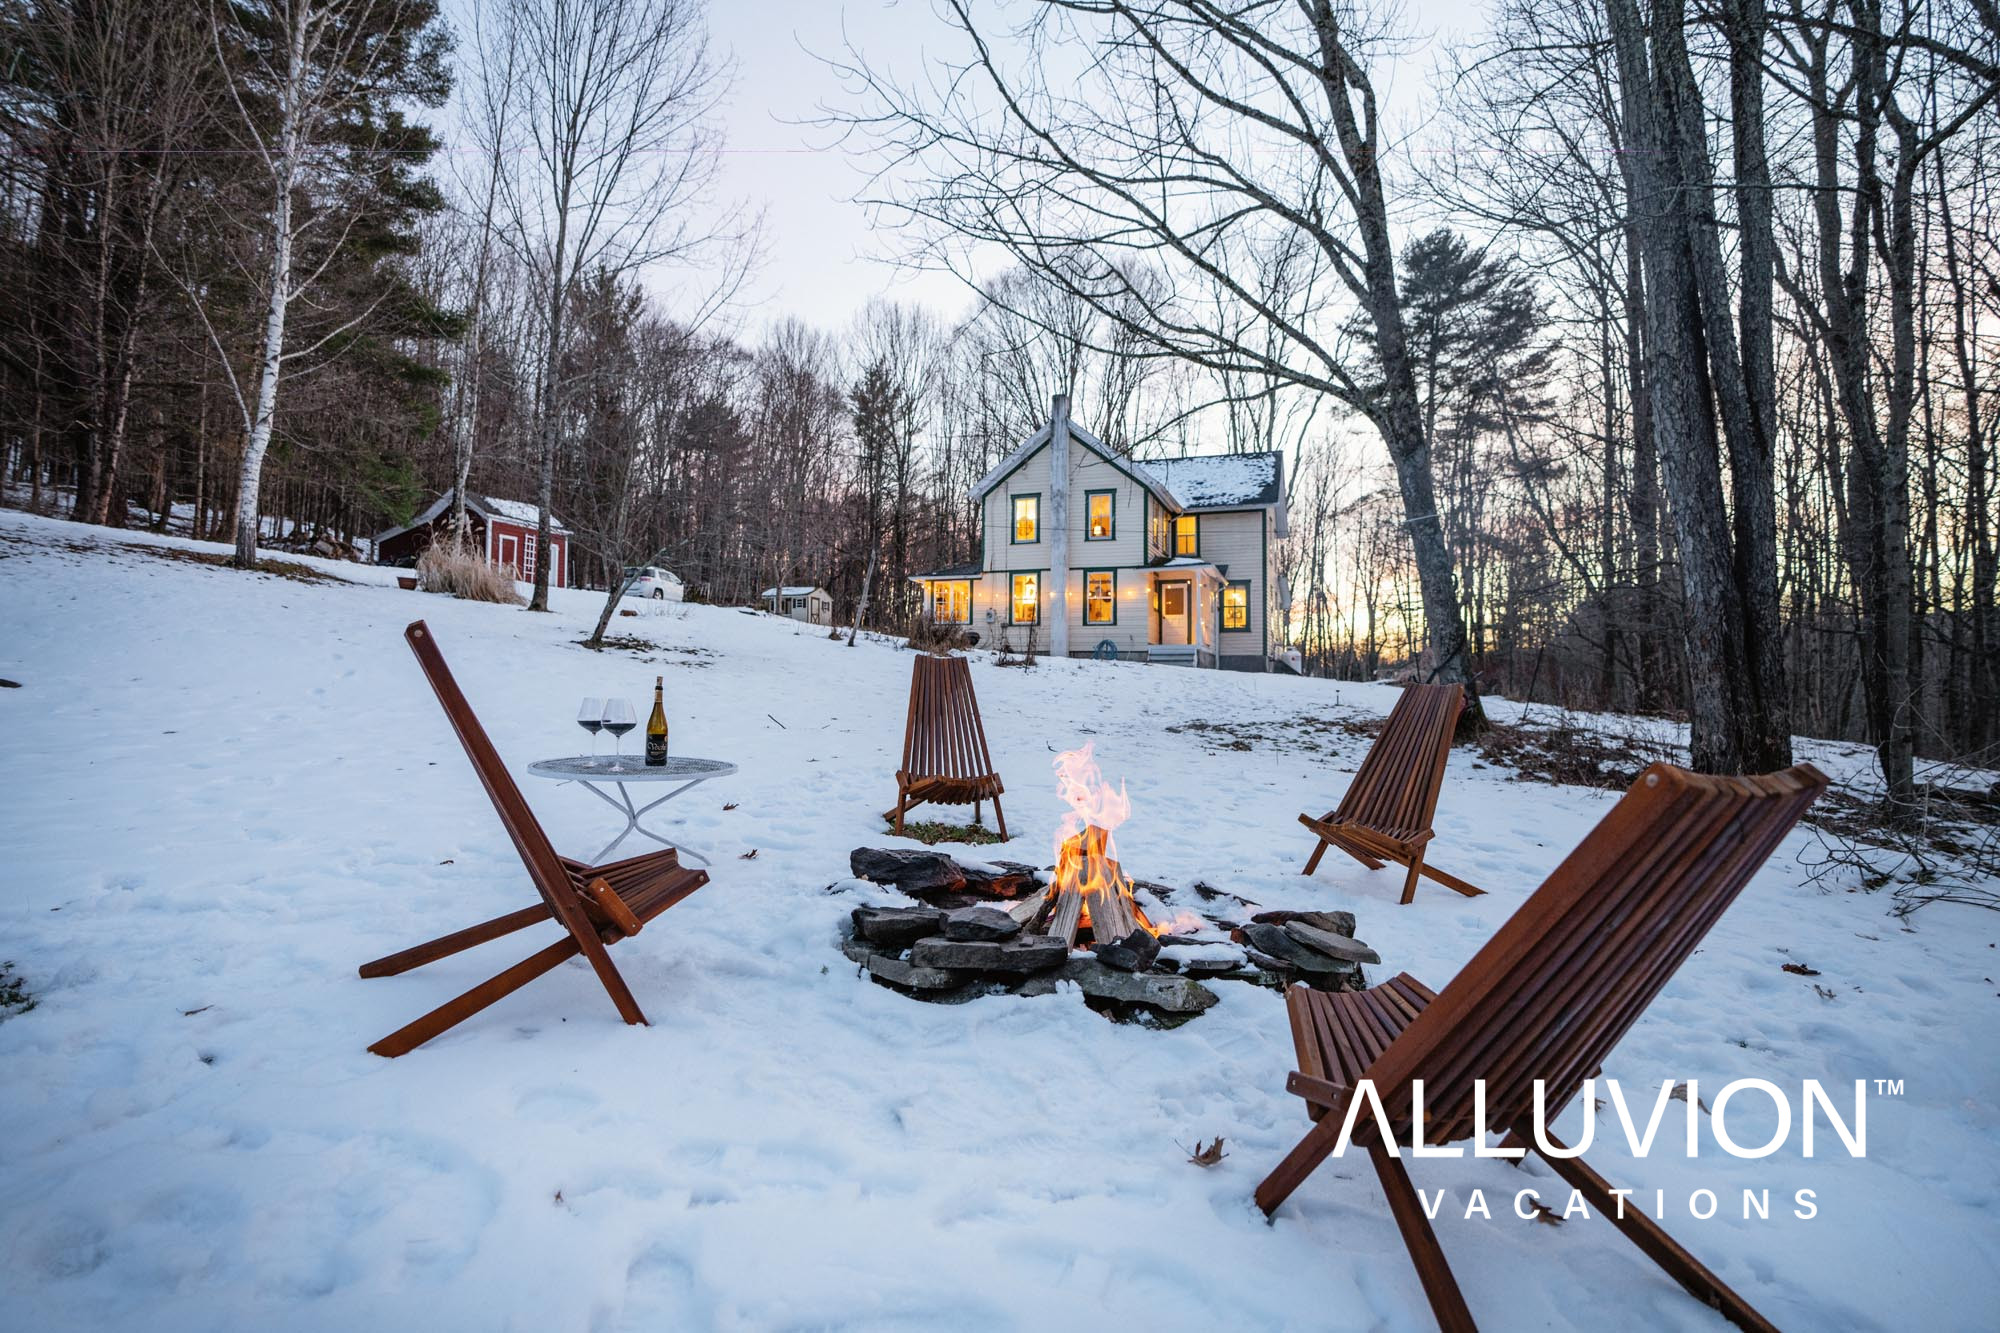 Experience Unforgettable Rustic Charm and Modern Flair at this Unique Catskill Mountains Farmhouse